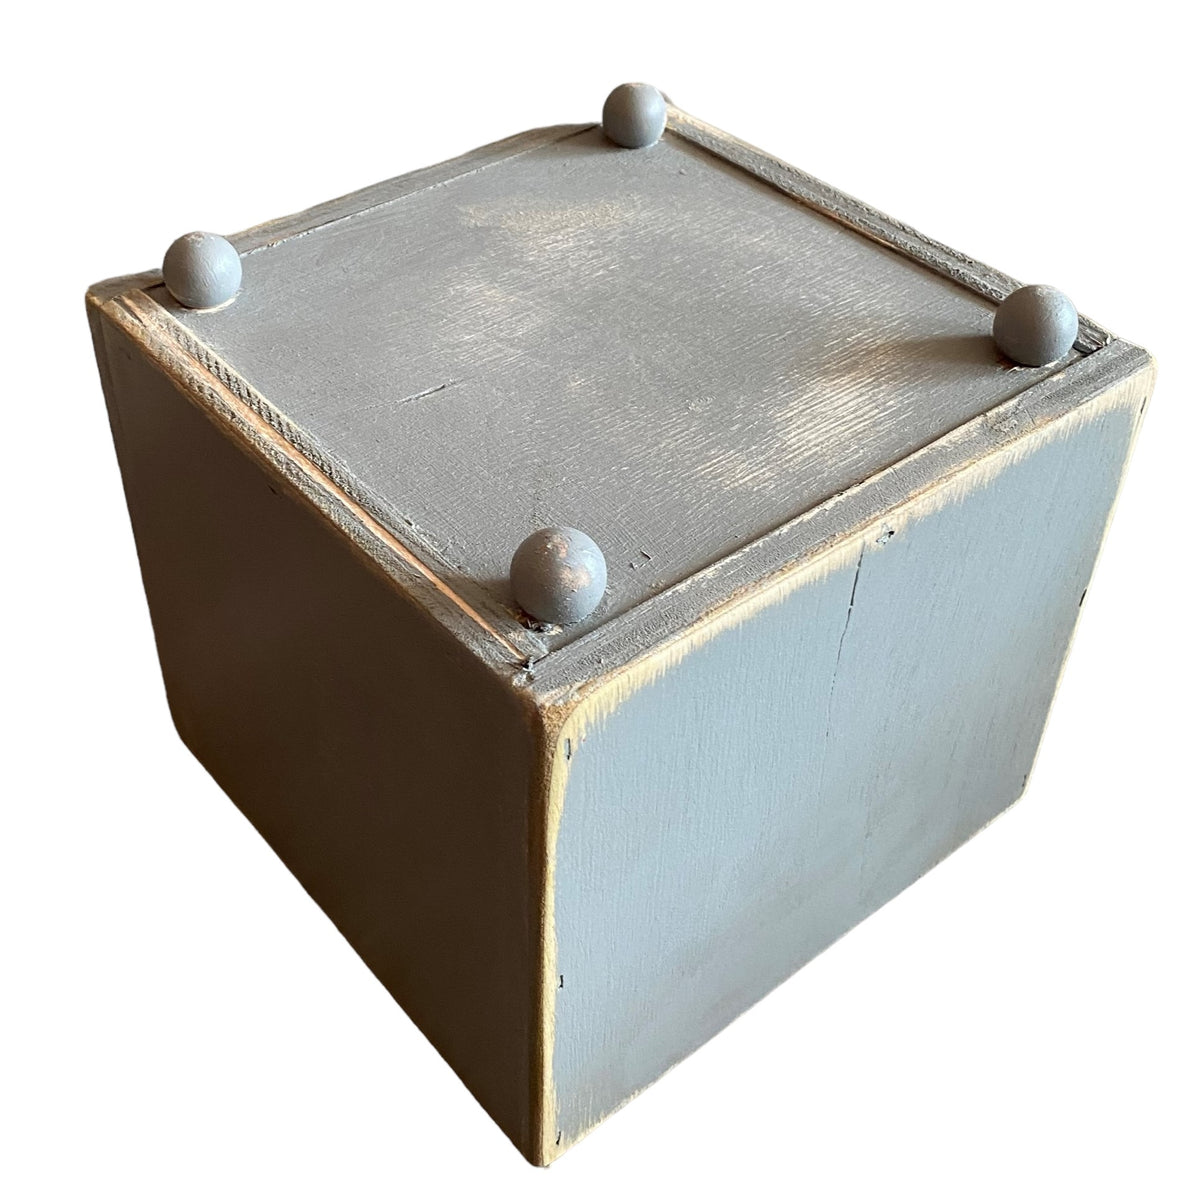 State Wooden Box Planter